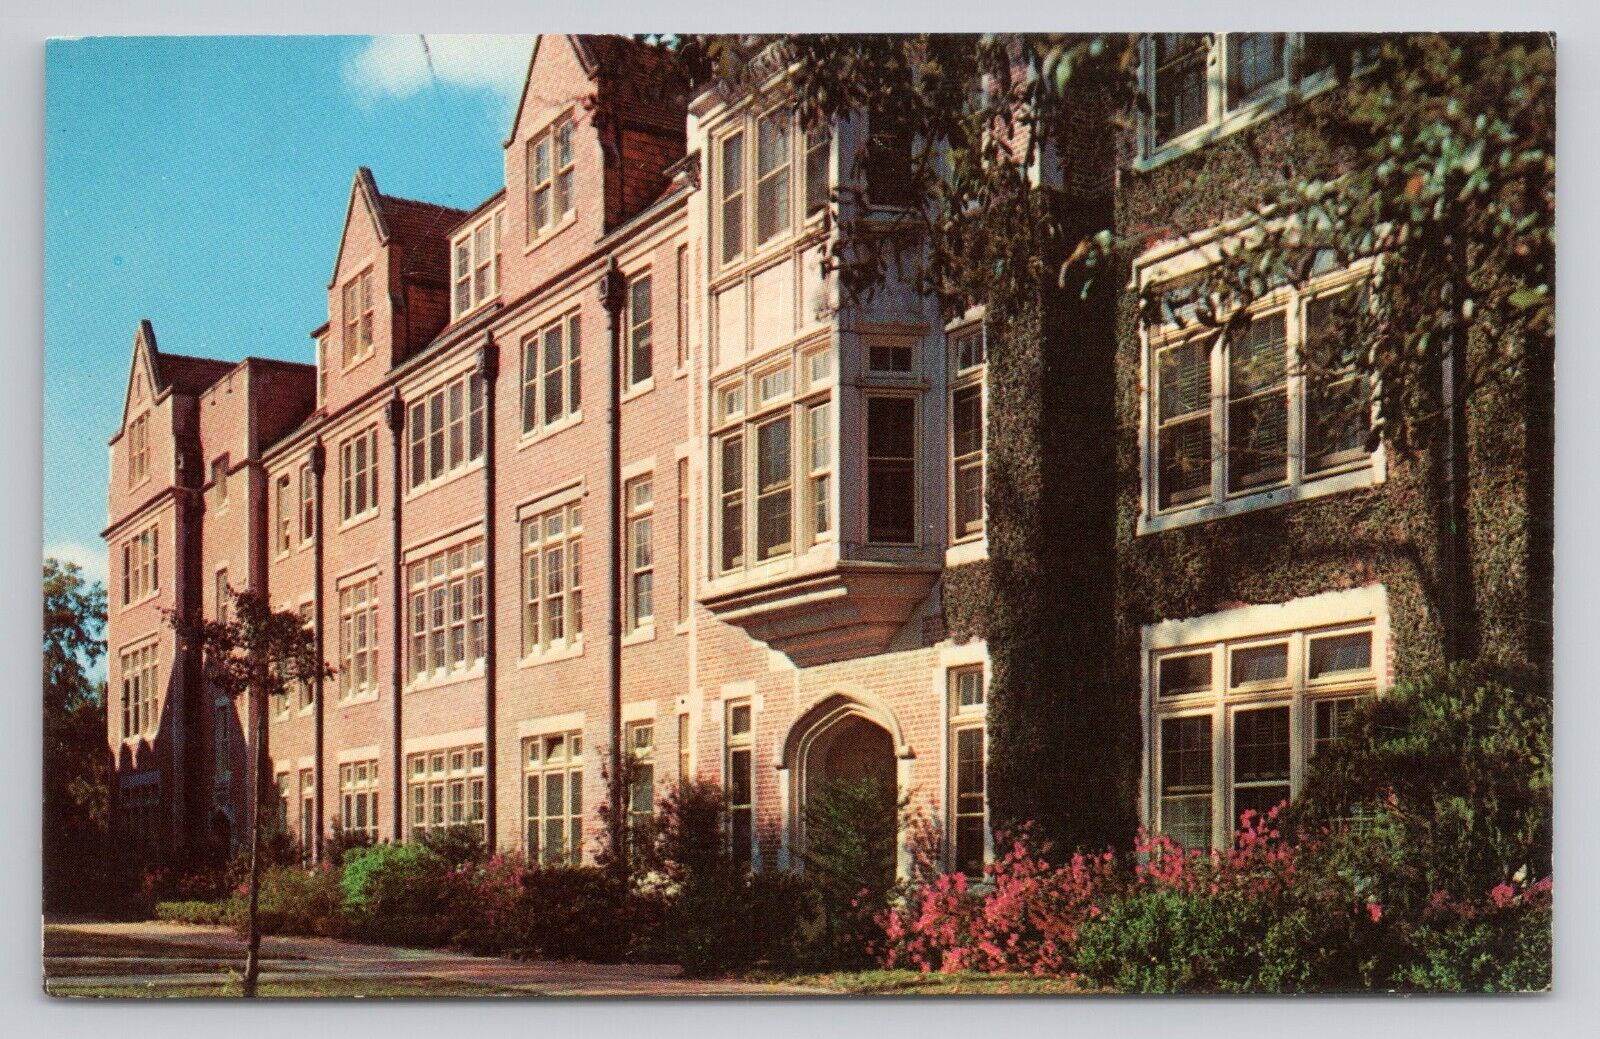 Leigh Hall Chemistry Building The University Of Florida Gainesville FL Postcard